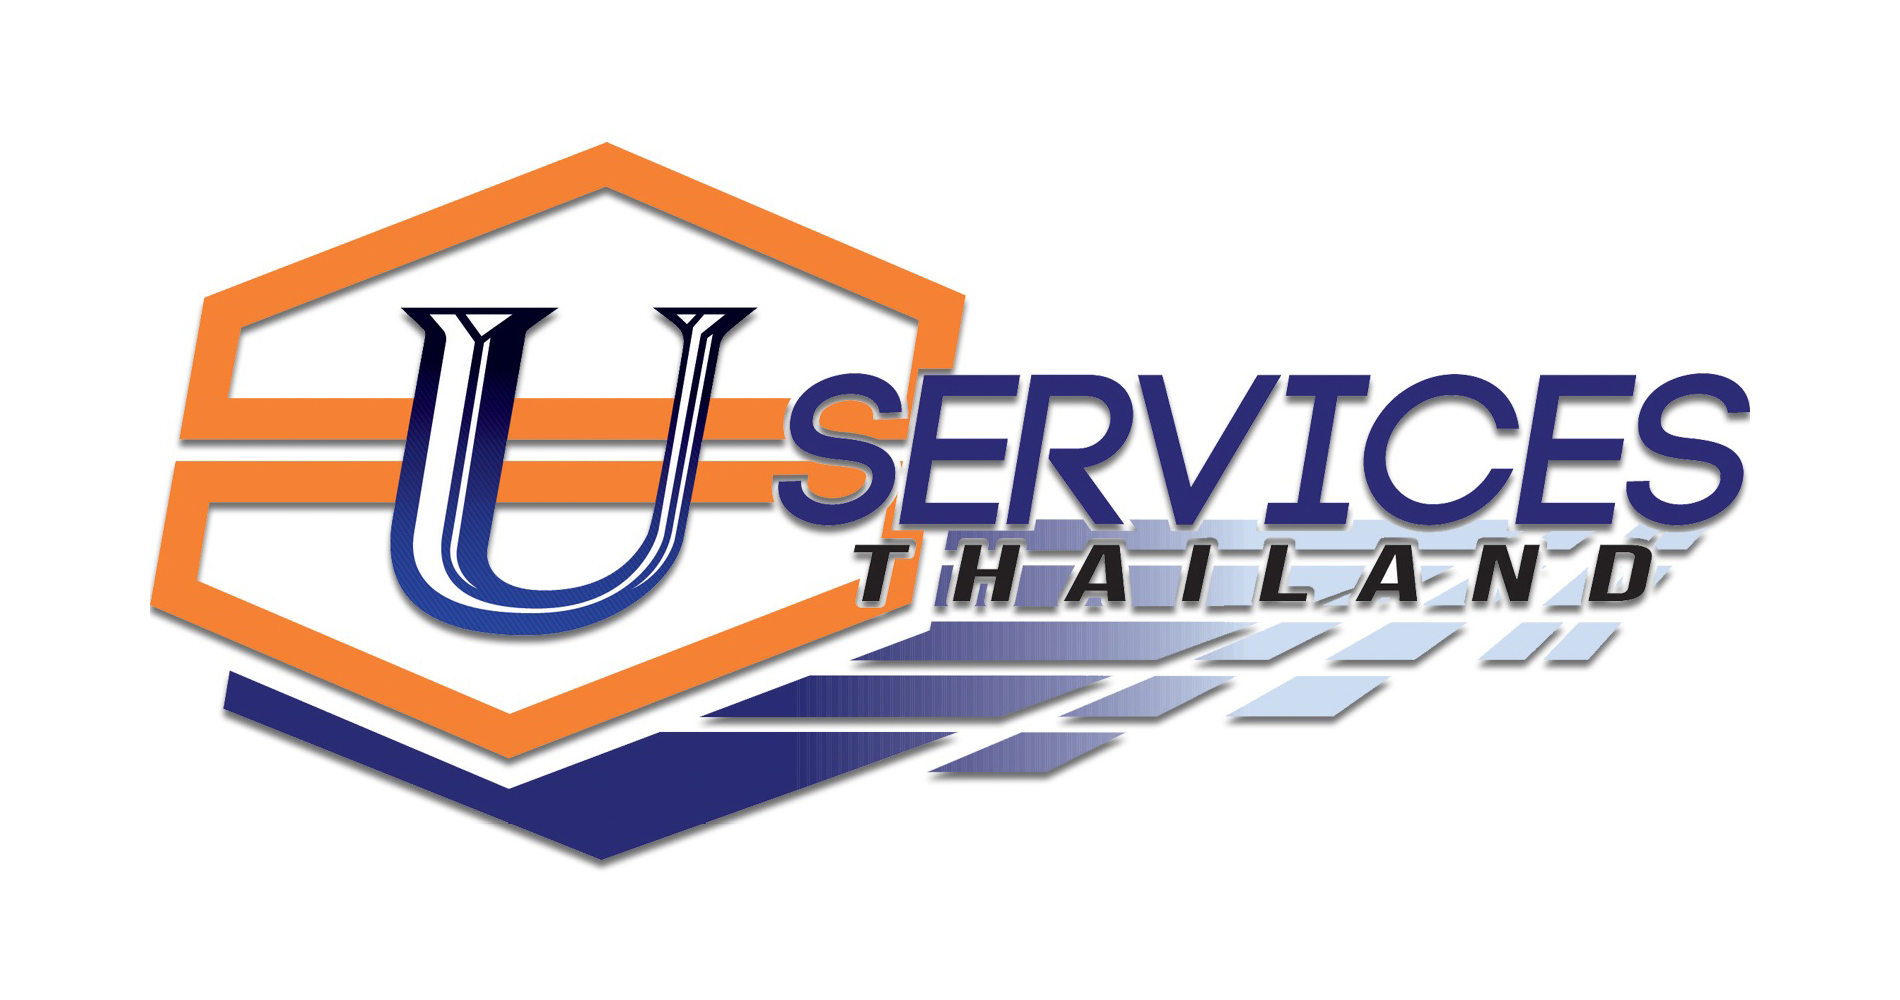 USERVICE Thailand_EXT